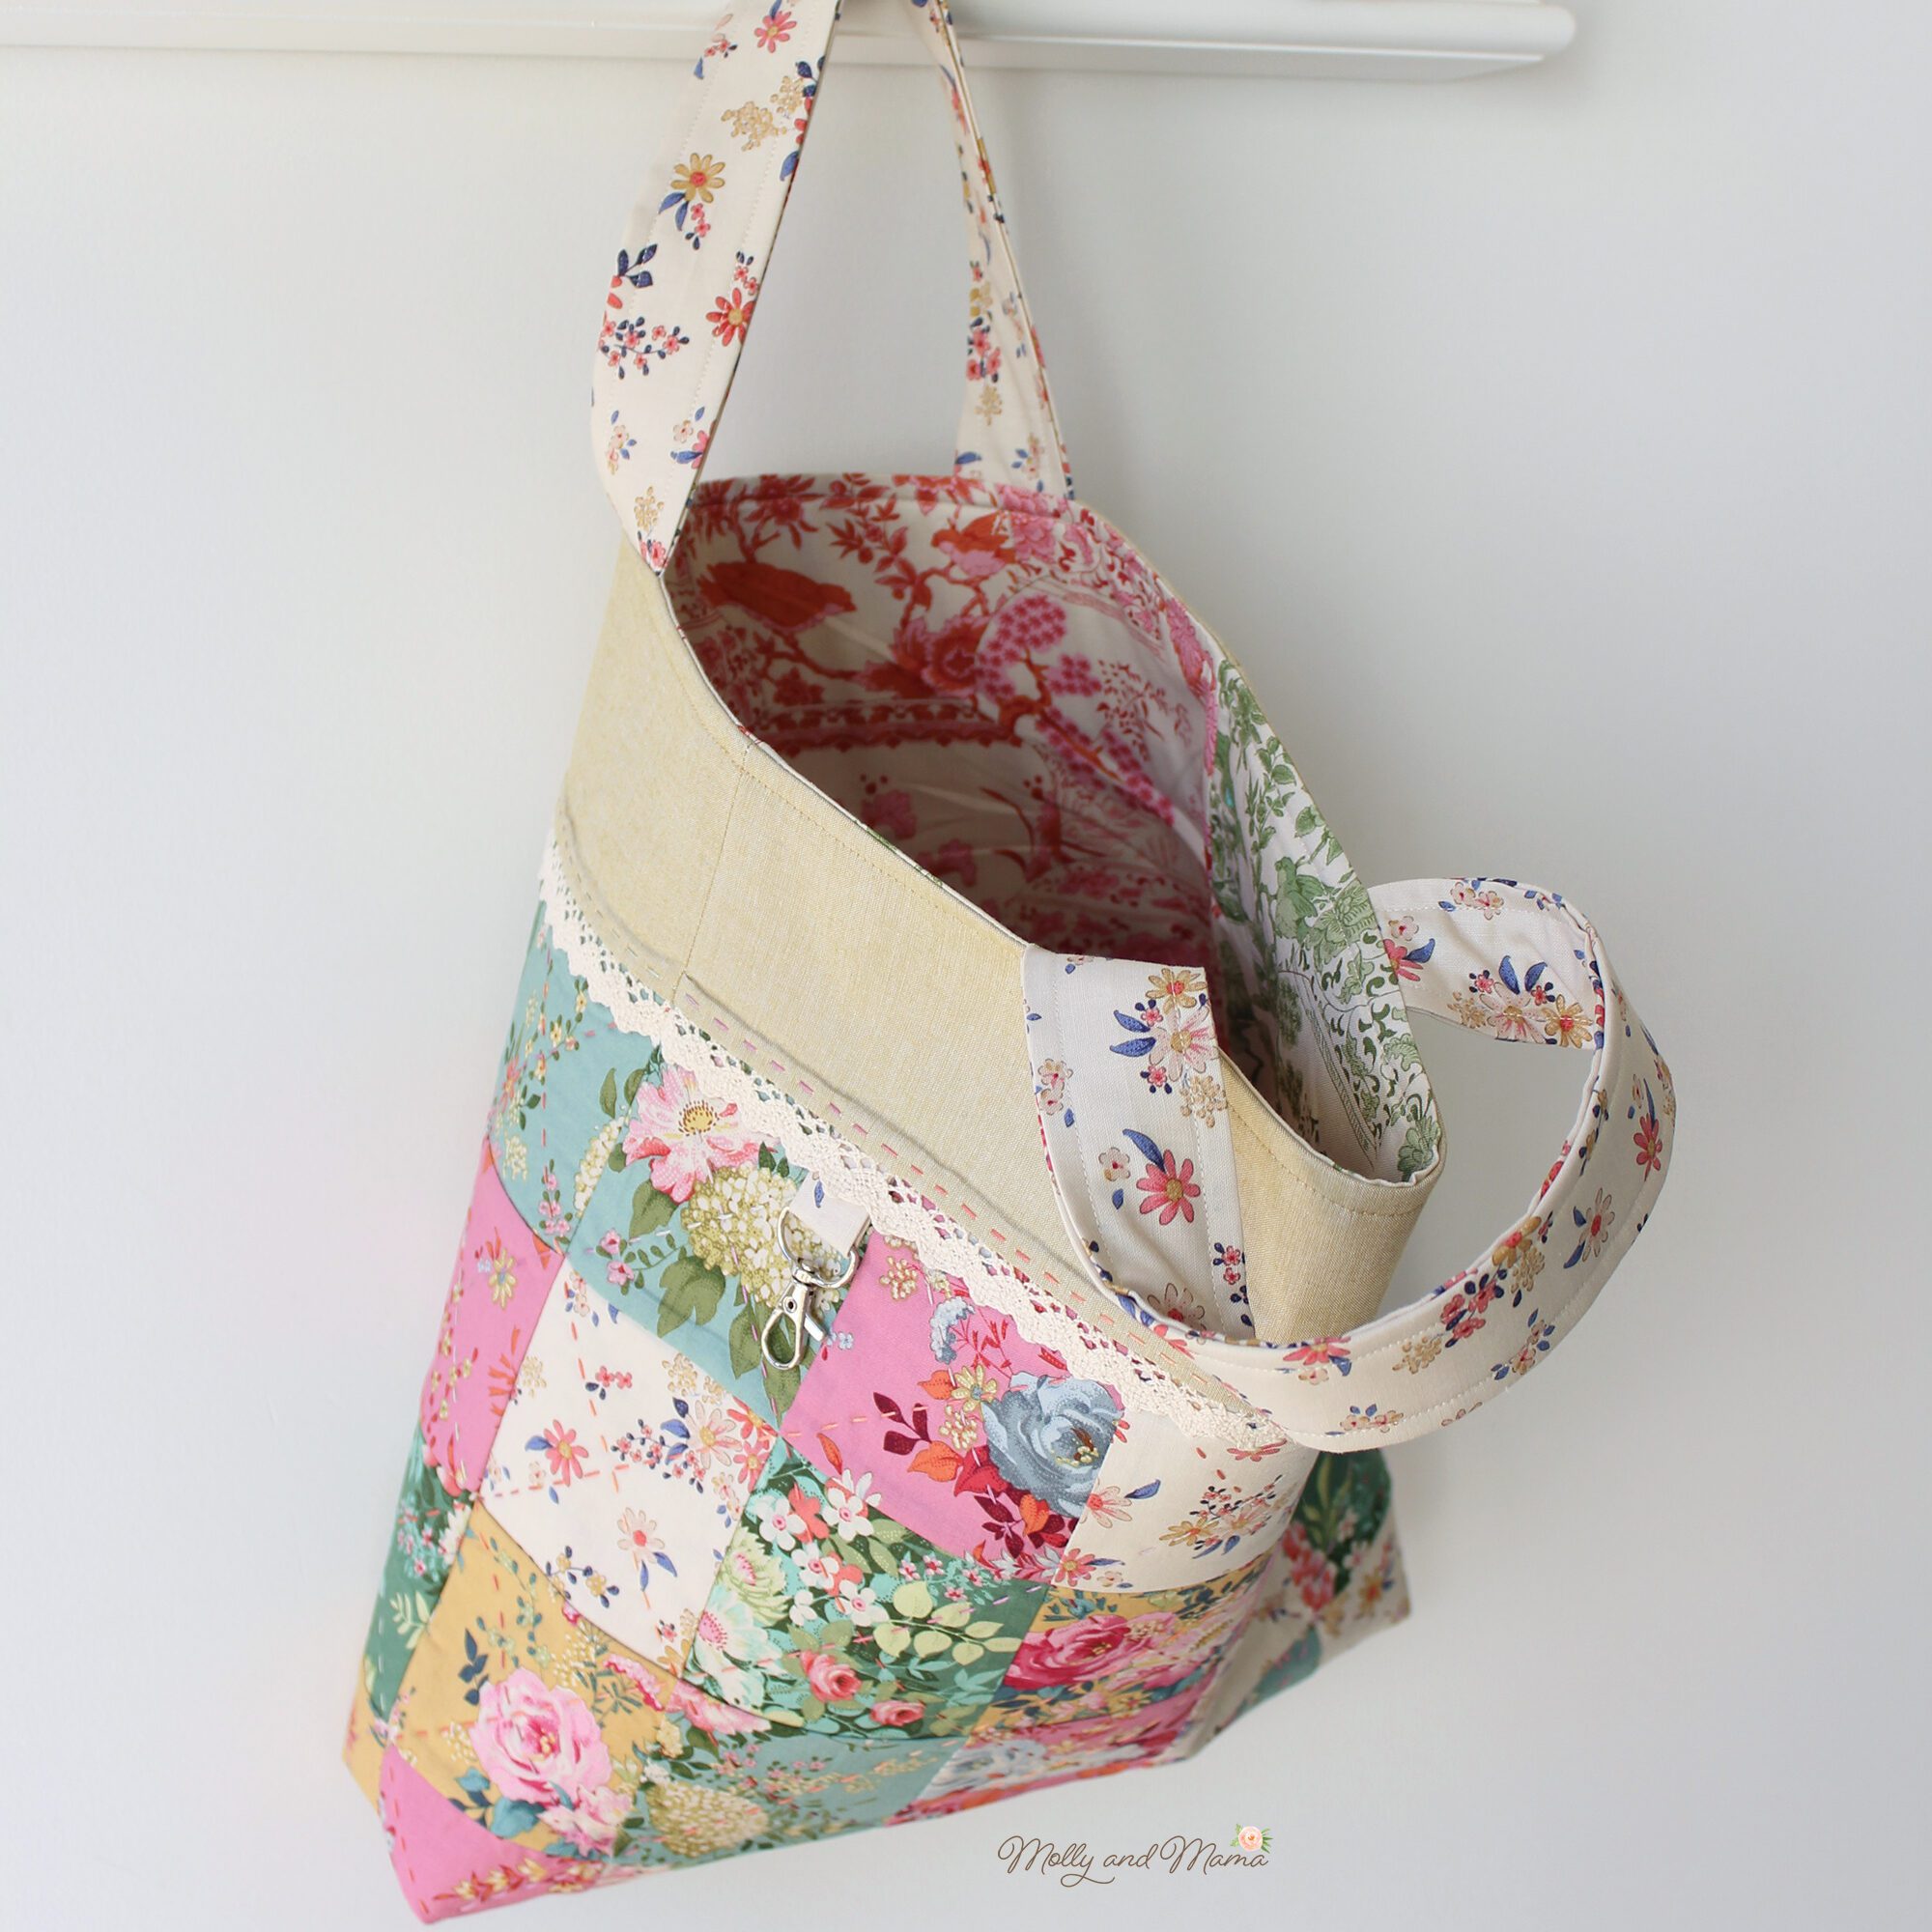 patchwork patterns for bags